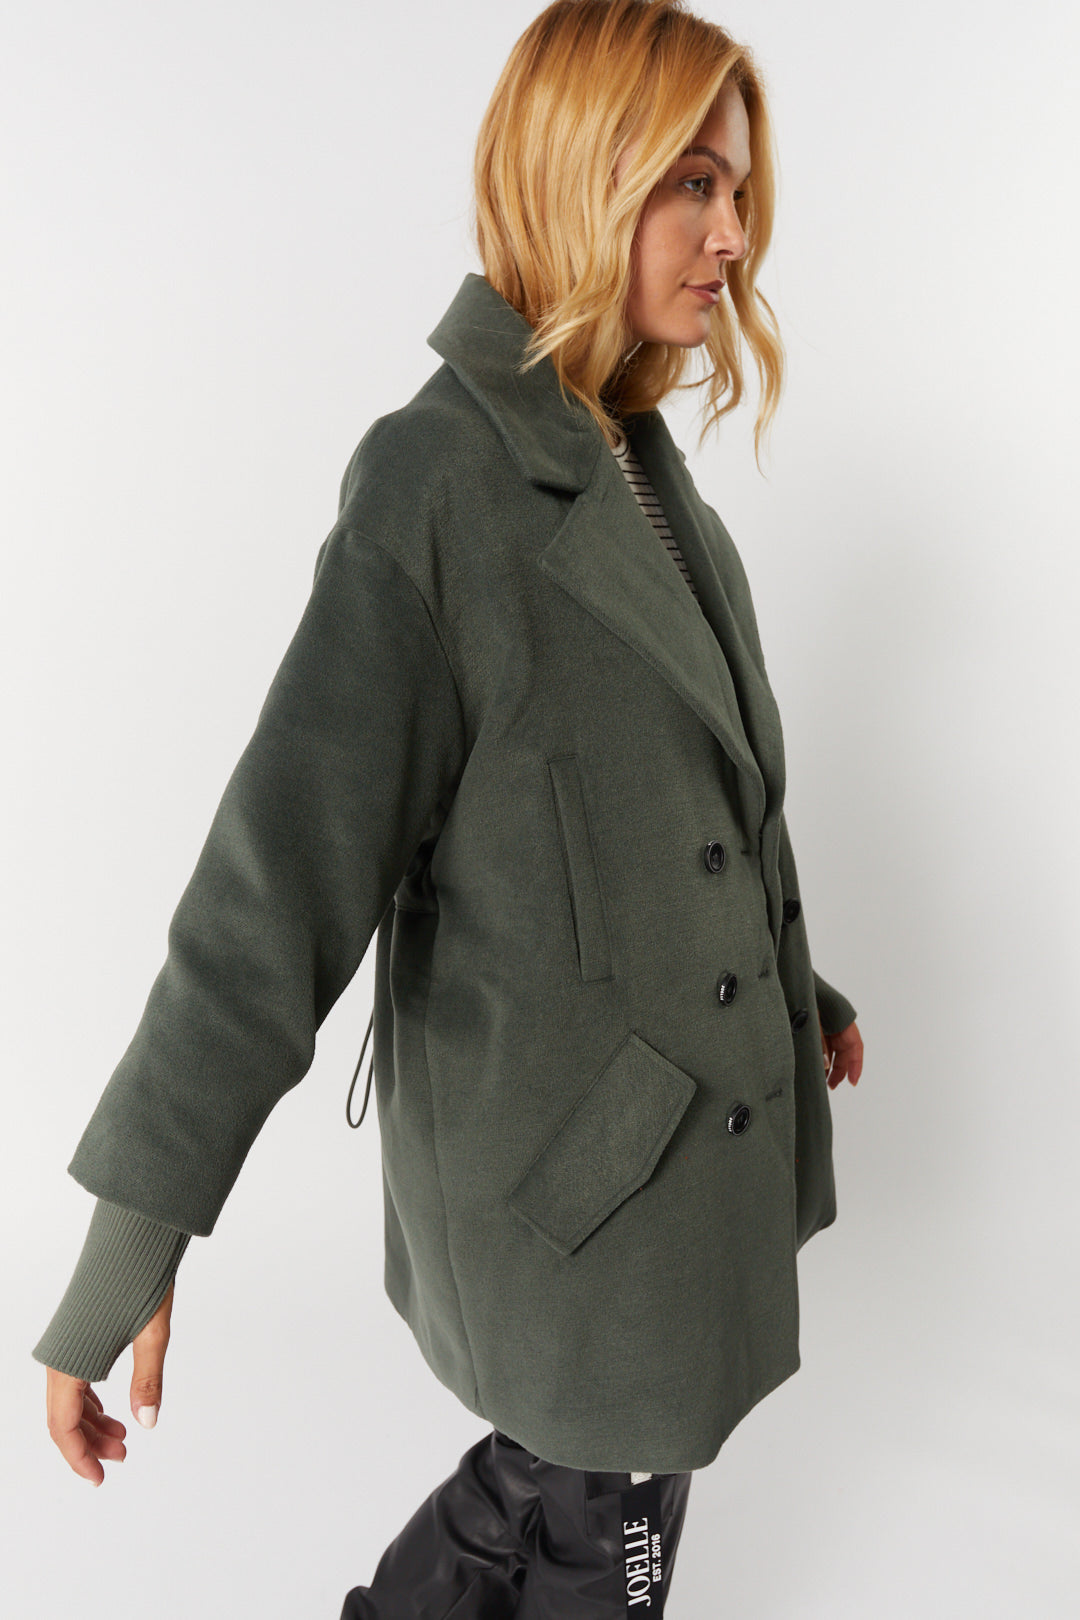 Sage green coat fitted at the back | Gwen